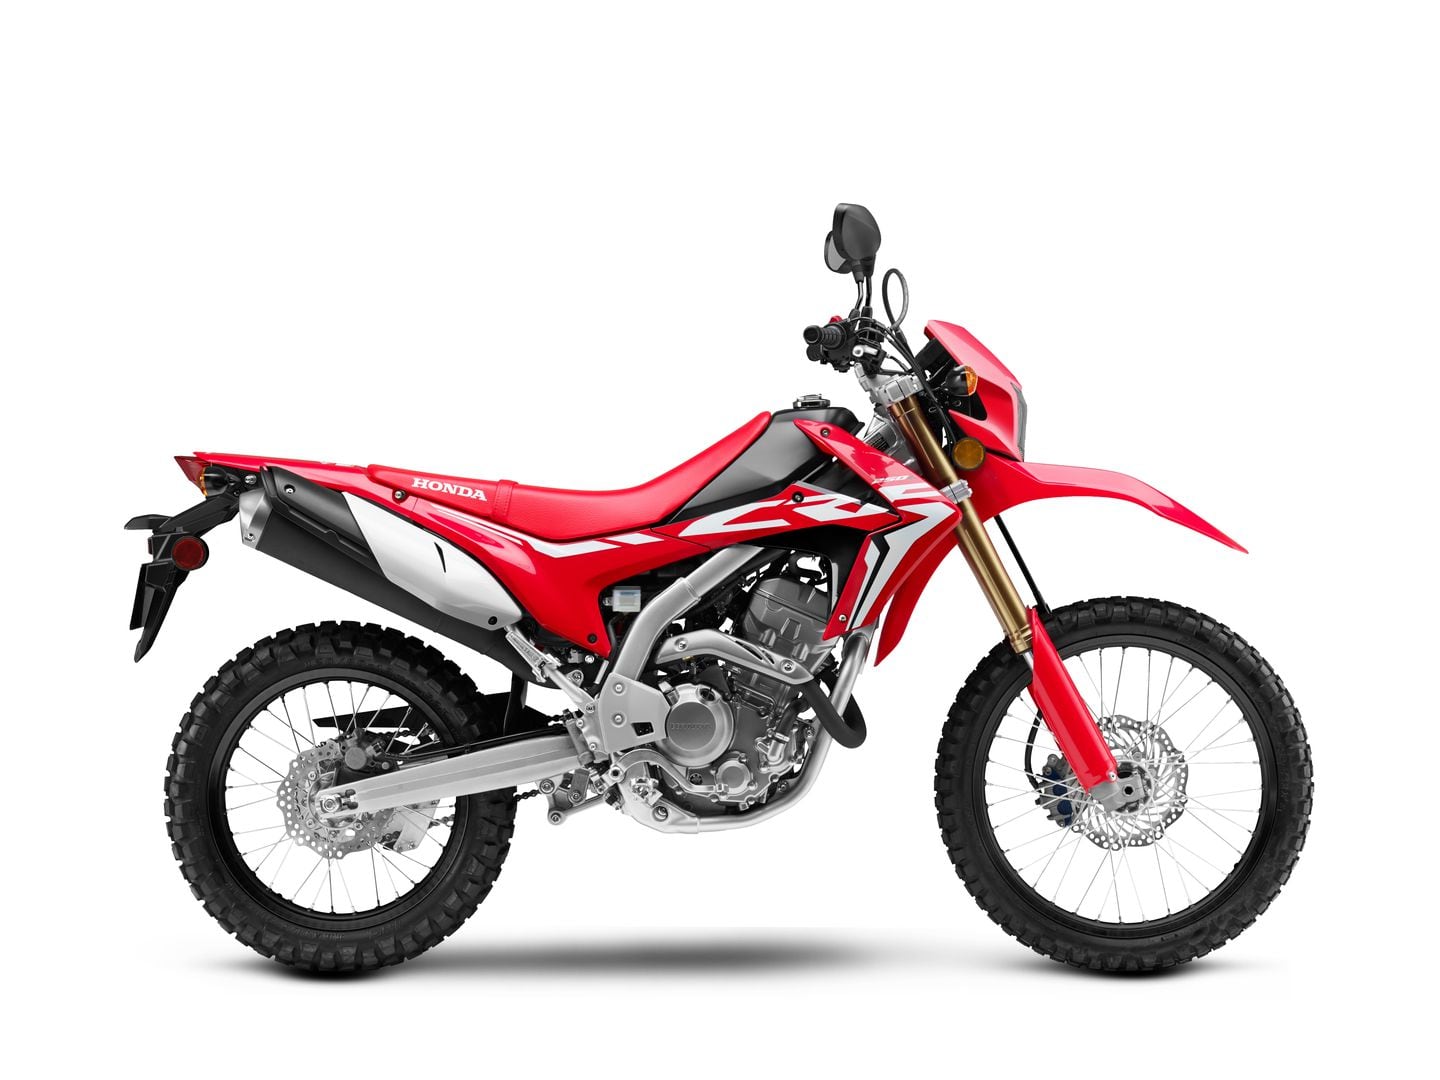 2020 Honda CRF250L/CRF250L Rally Buyer's Guide: Specs, Photos, Price | Cycle World